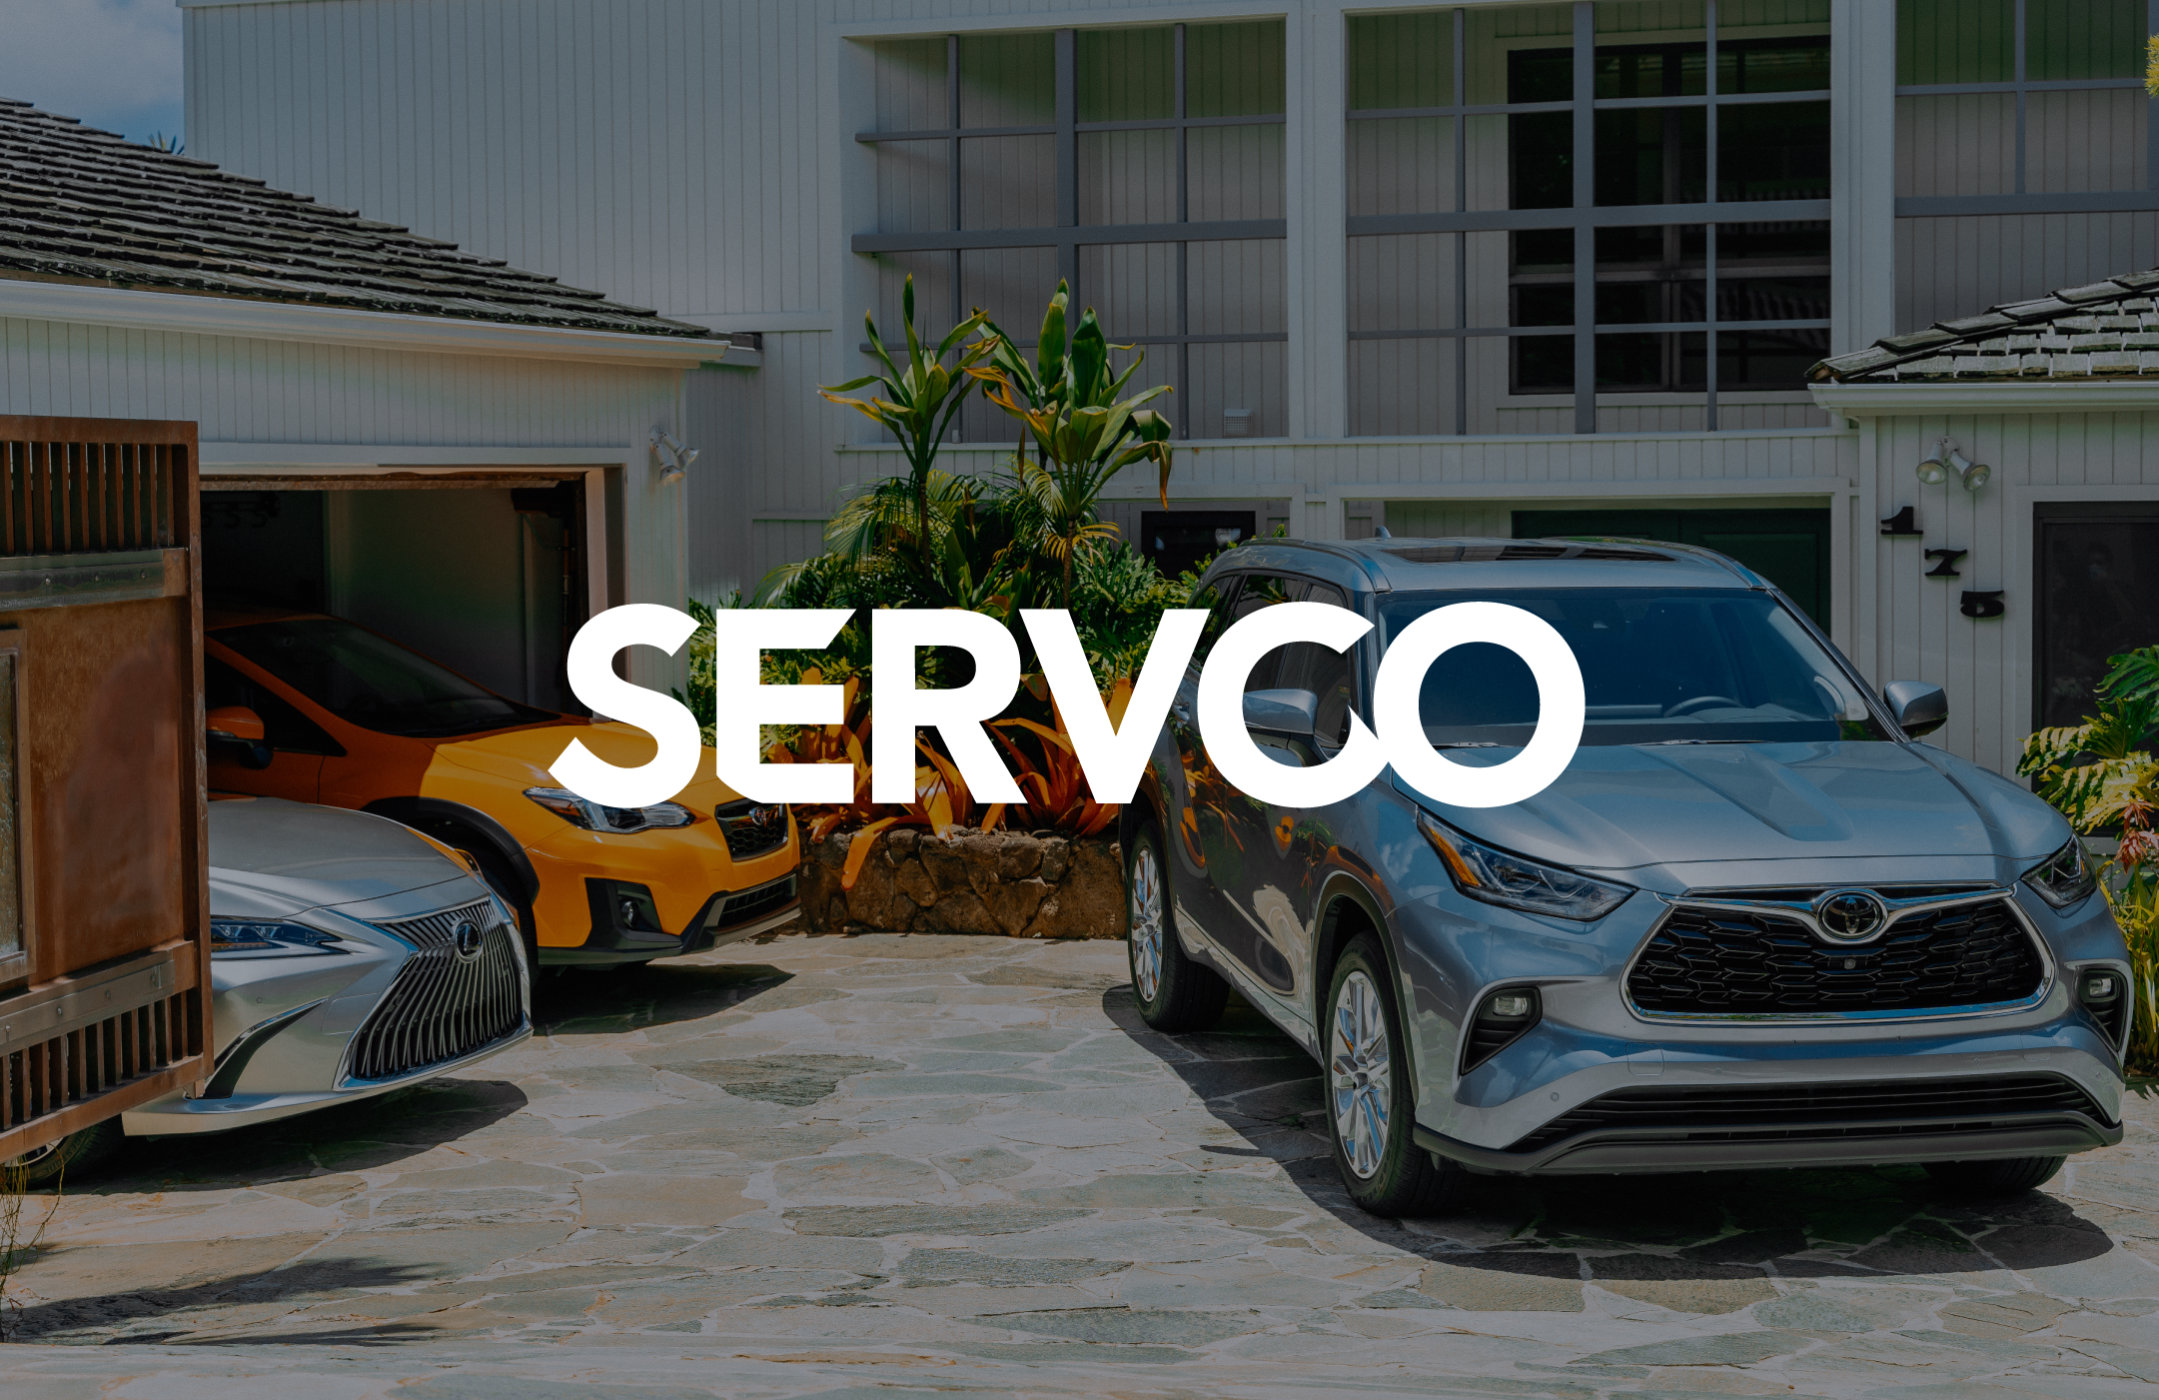 Servco logo overlaid on top top of an image of a car
